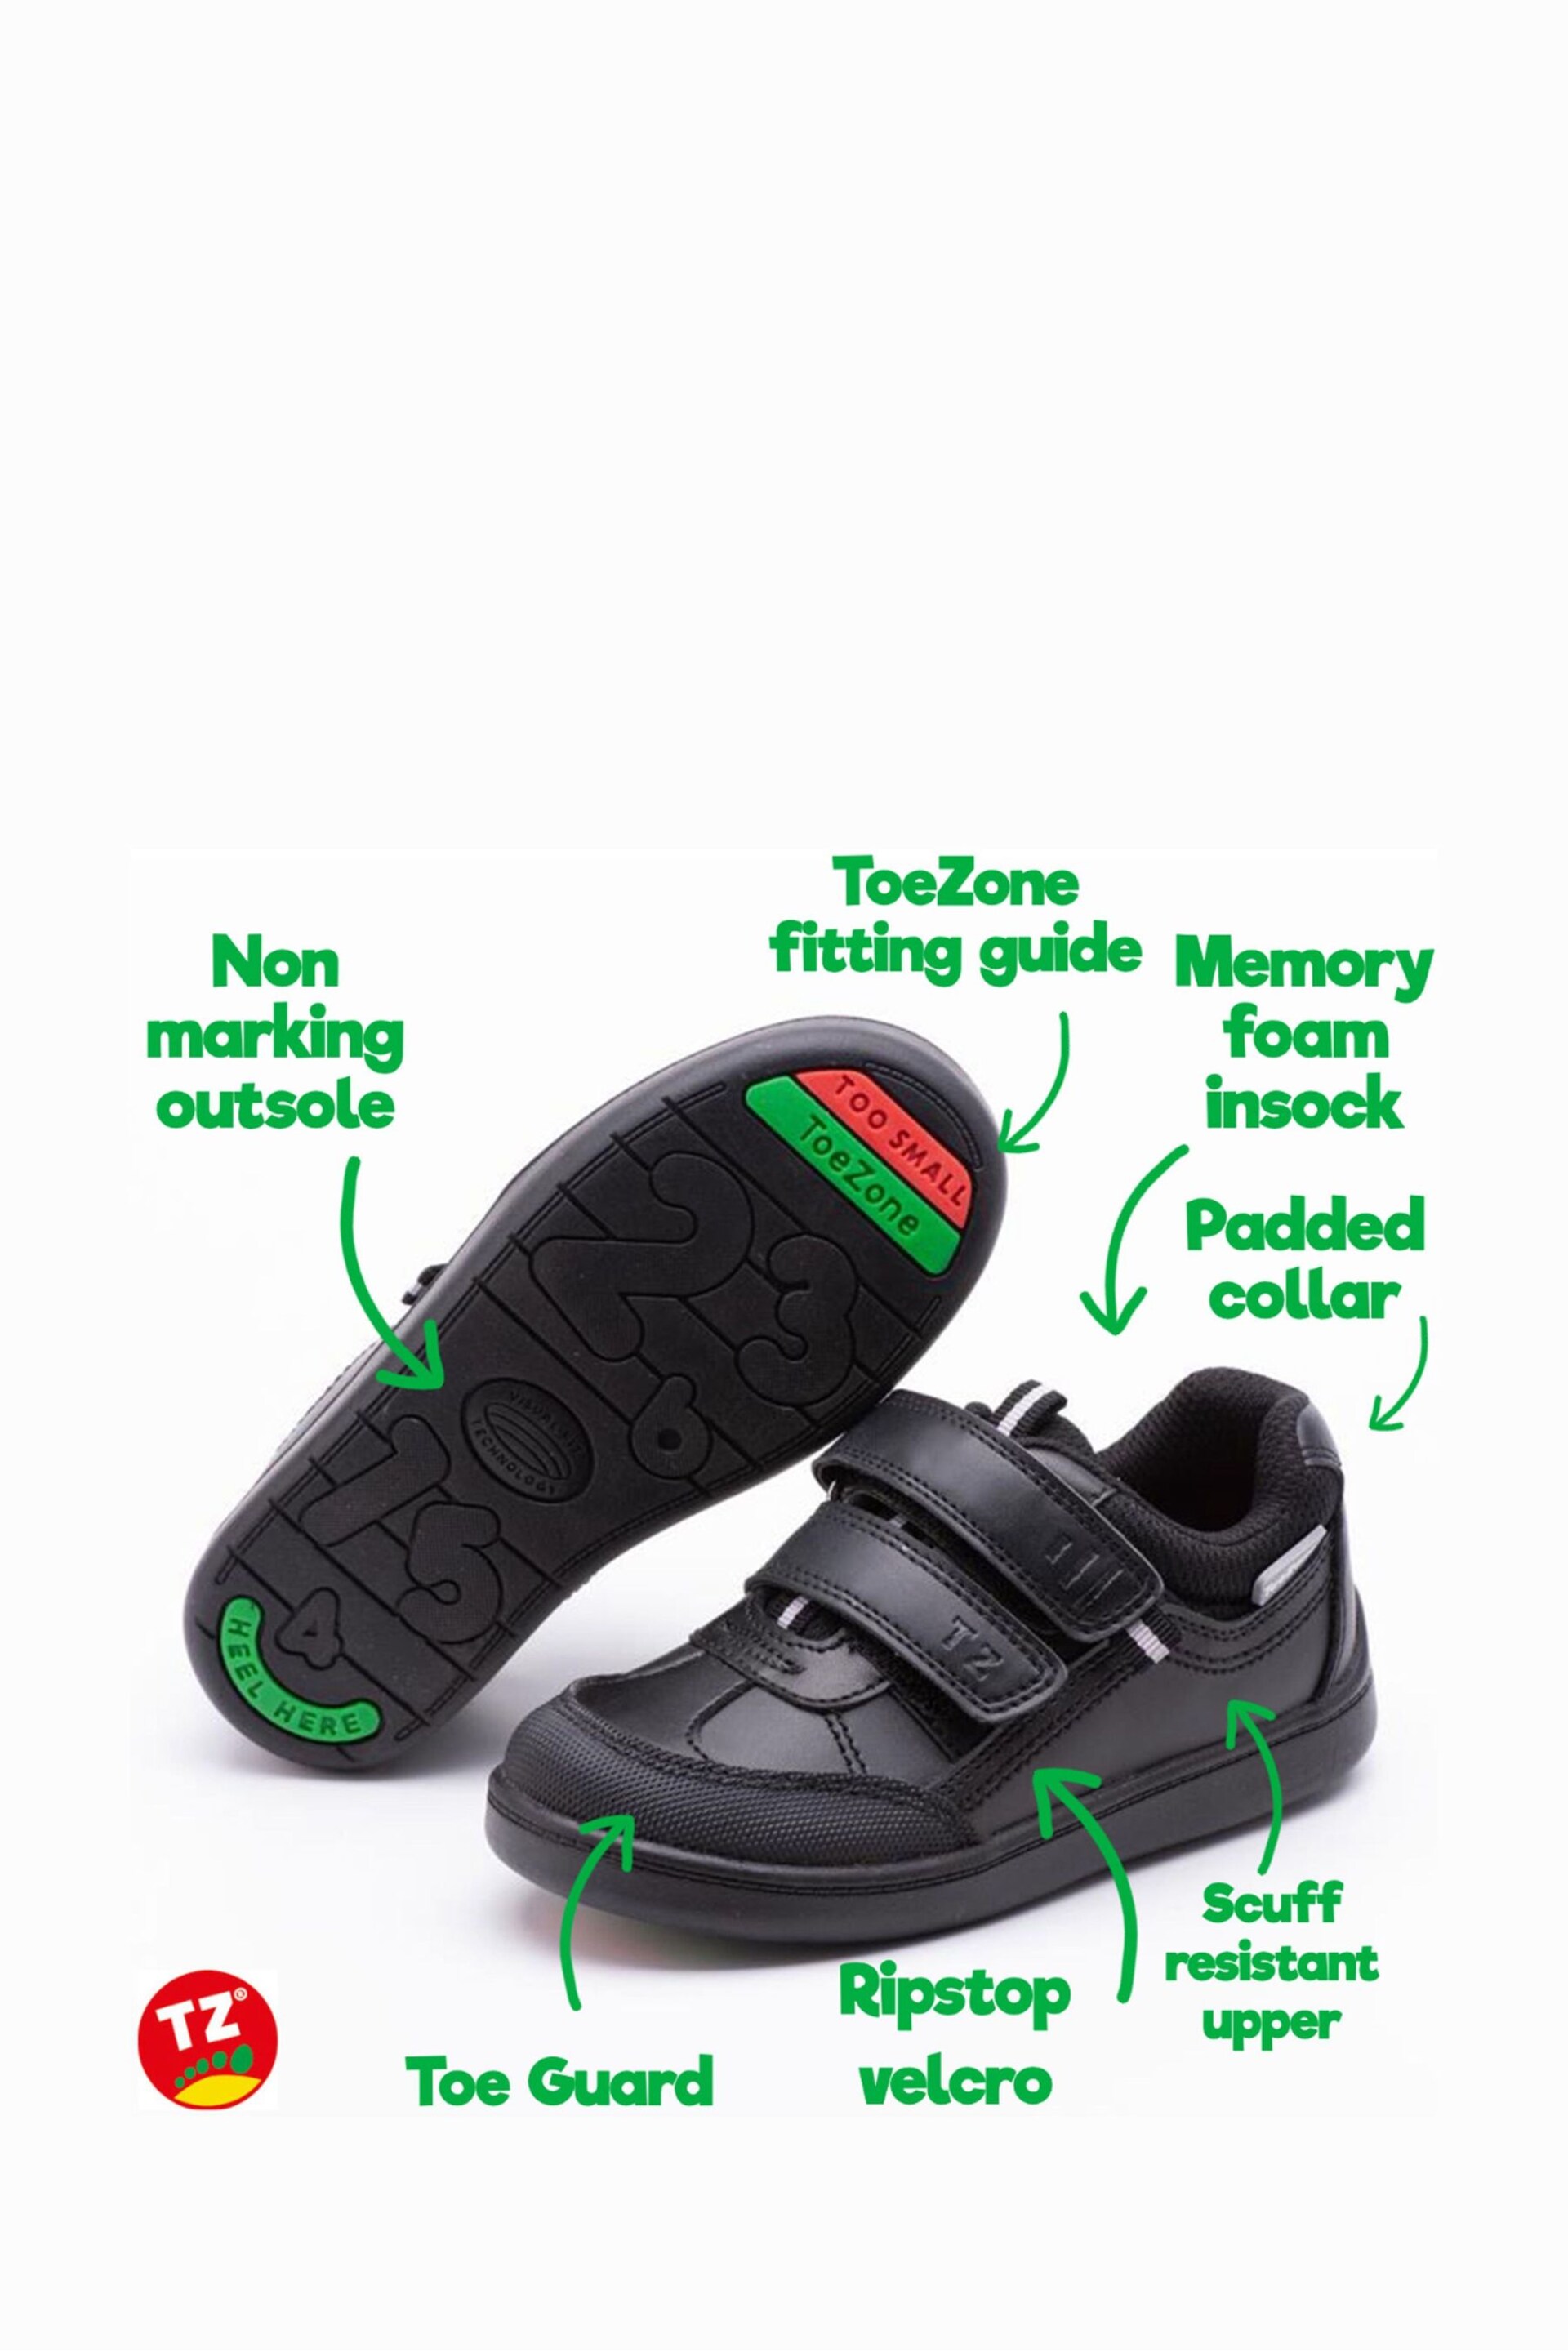 Toezone LEO Double Rip Tape Fastening Super Cool Black Shoes - Image 4 of 7